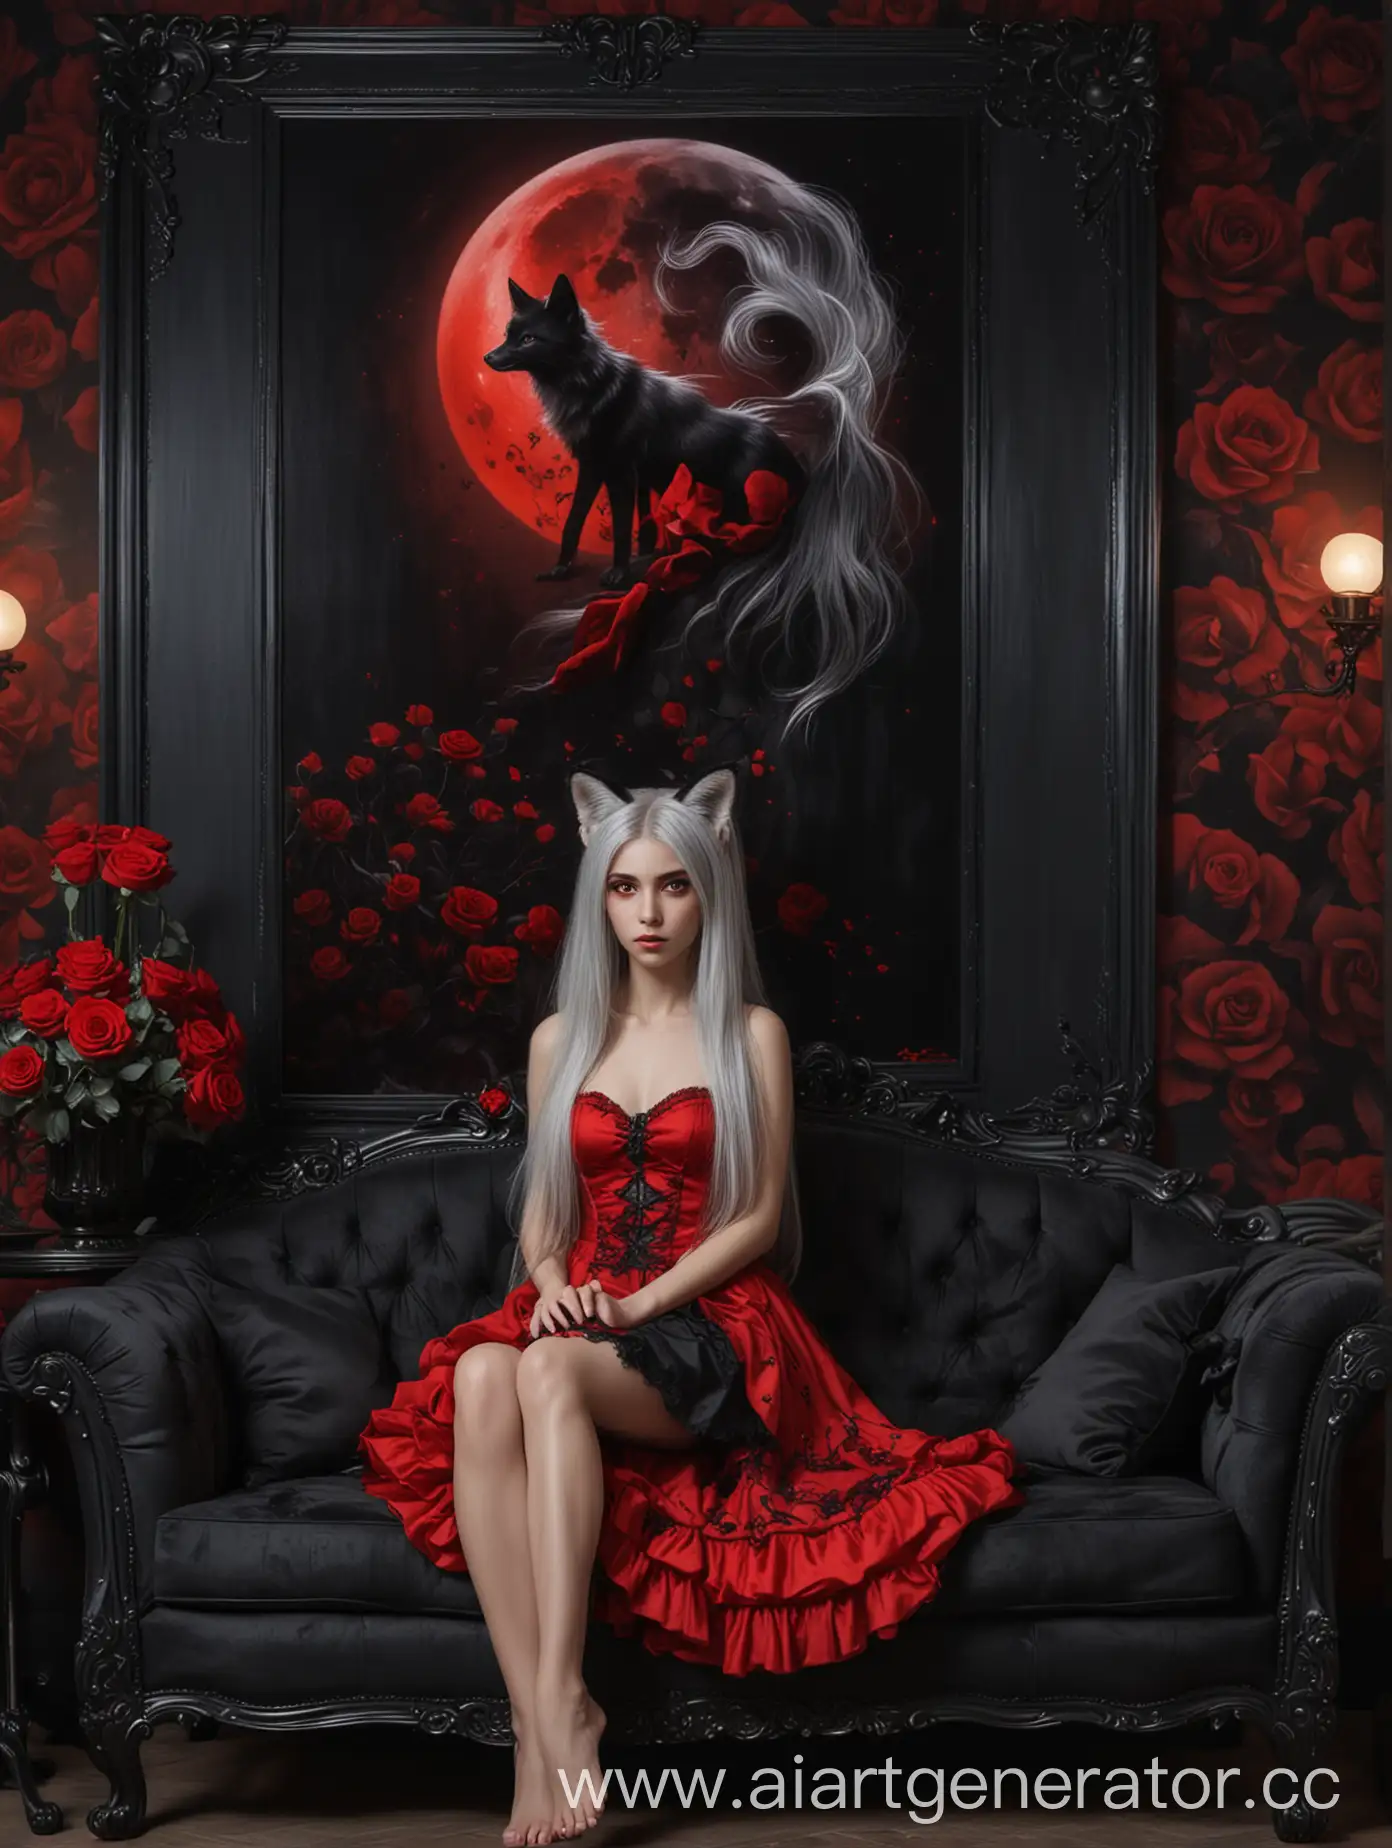 A girl with long gray hair, red eyes, fox-like black ears, in a black and red dress with black roses, a girl is sitting on a luxurious black sofa against the background of a painting with a black frame in the painting a bright red moon